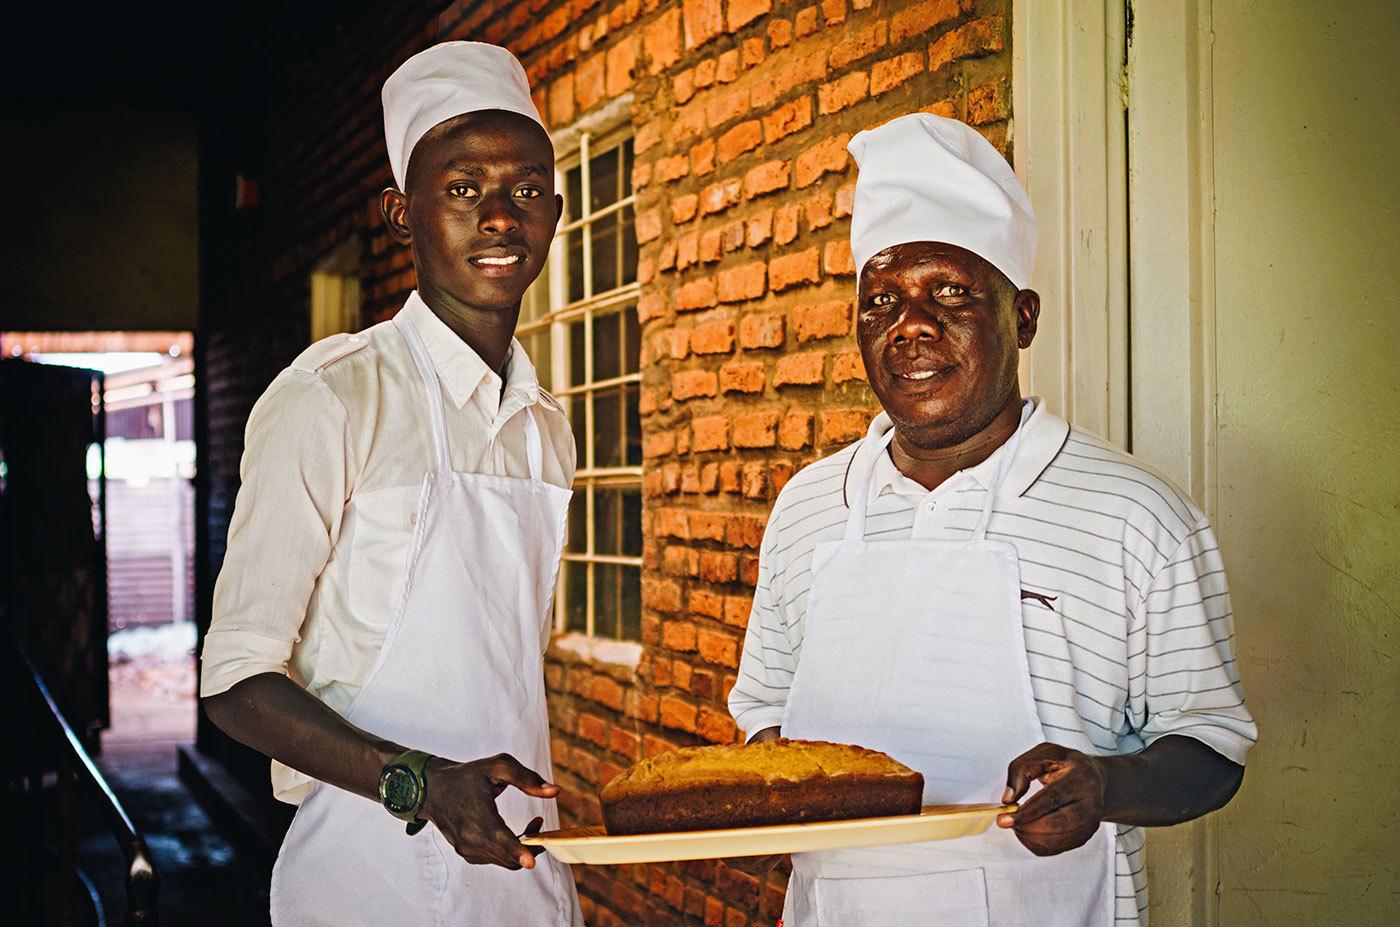 Two Rwandan chefs in white aprons and caps hold a try of banana bread